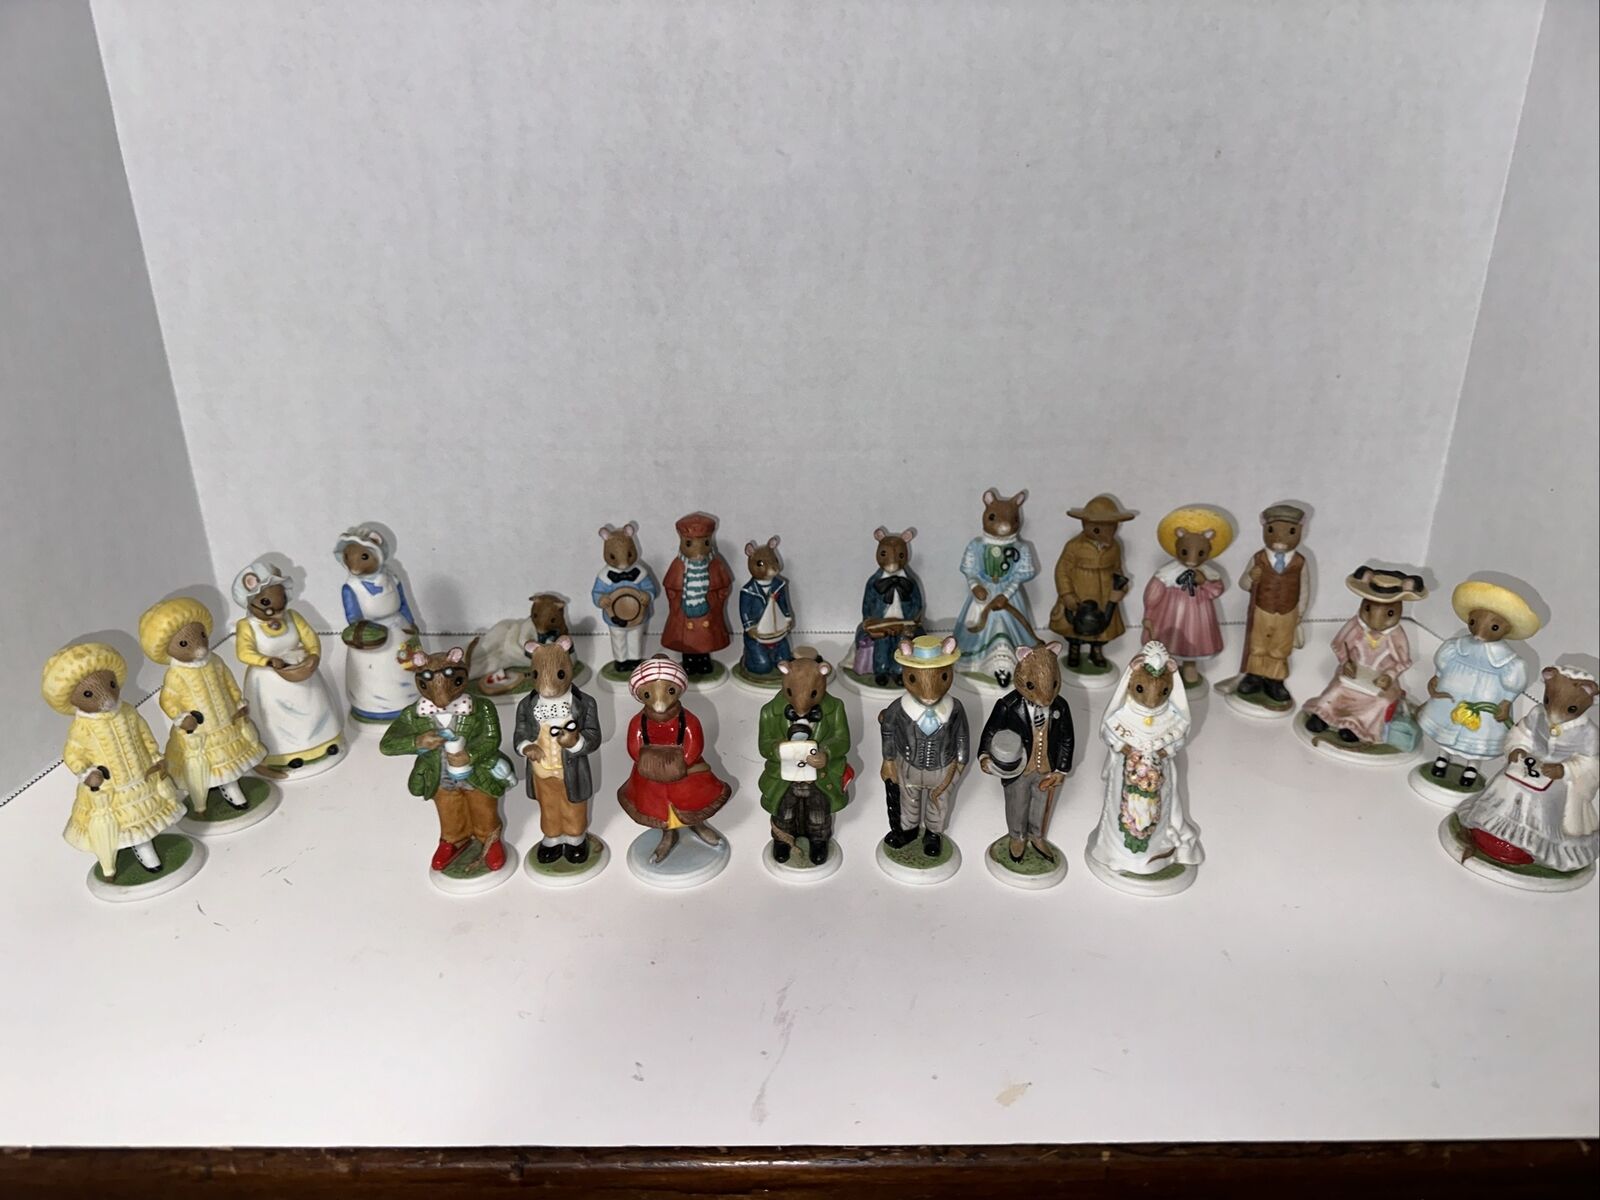 Lot of 23 Franklin Mint Woodmouse Family Porcelain Mice Figurines, No boxes